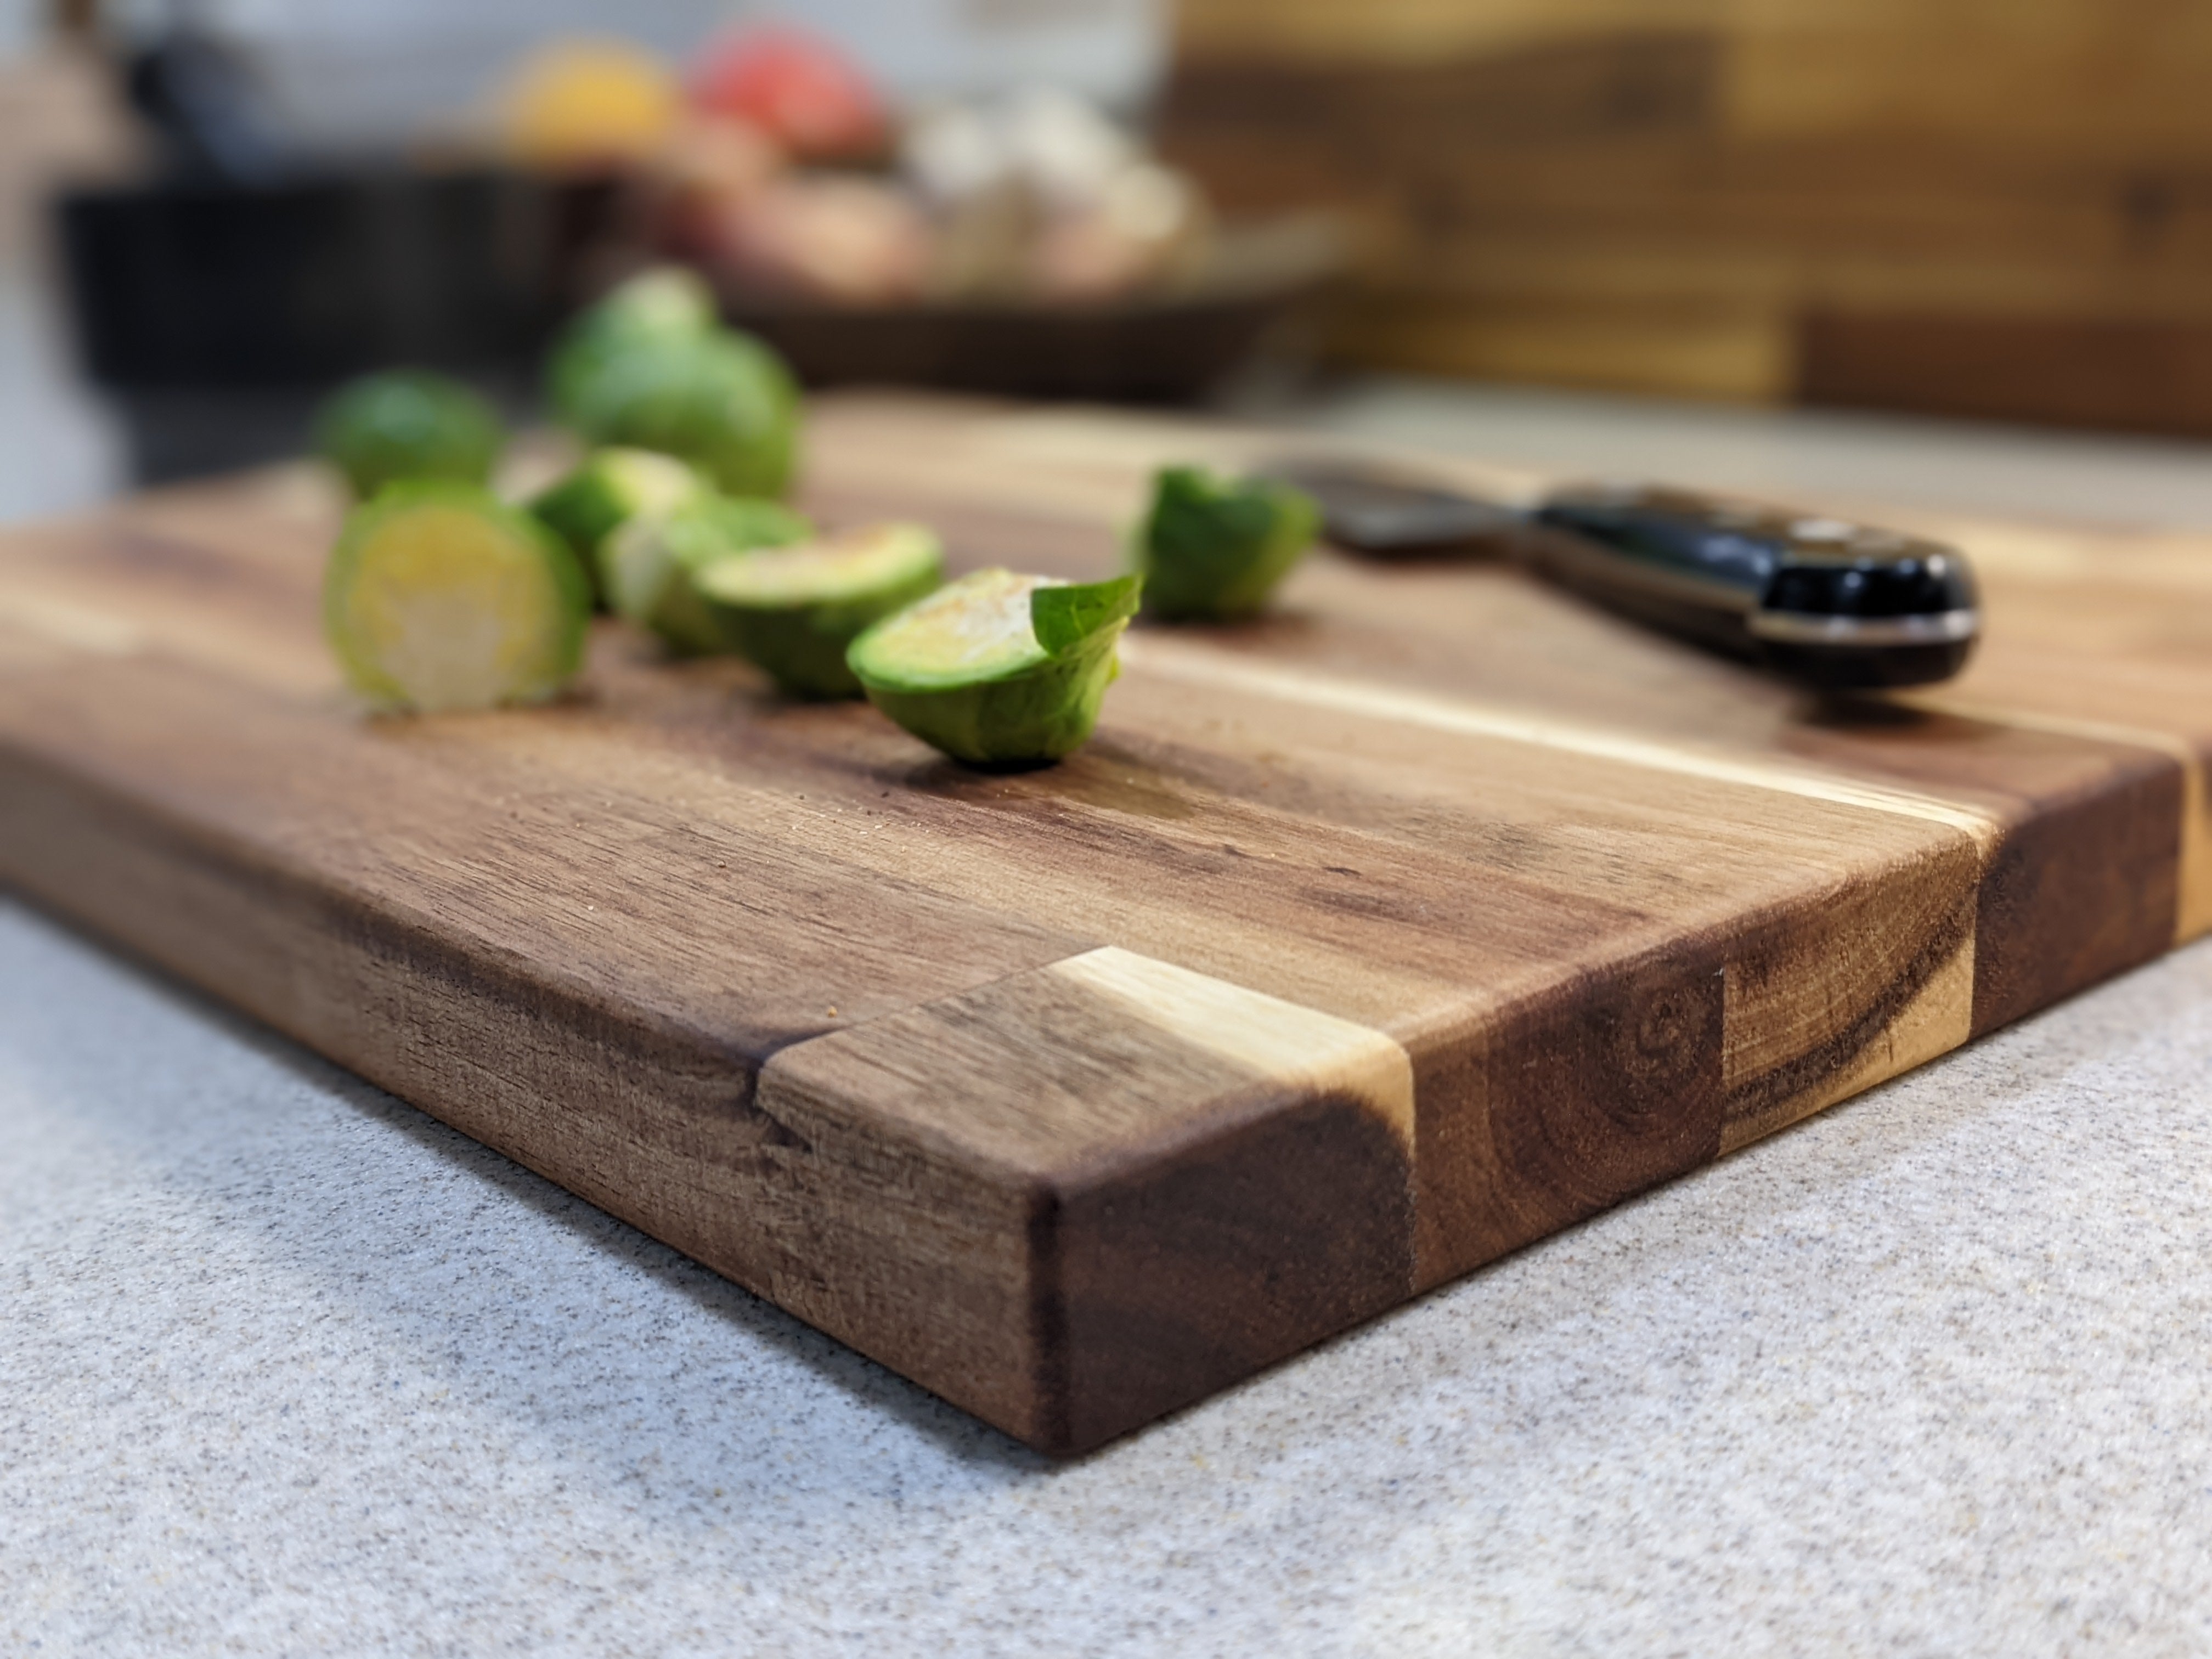 What is the best wood for a cutting board?